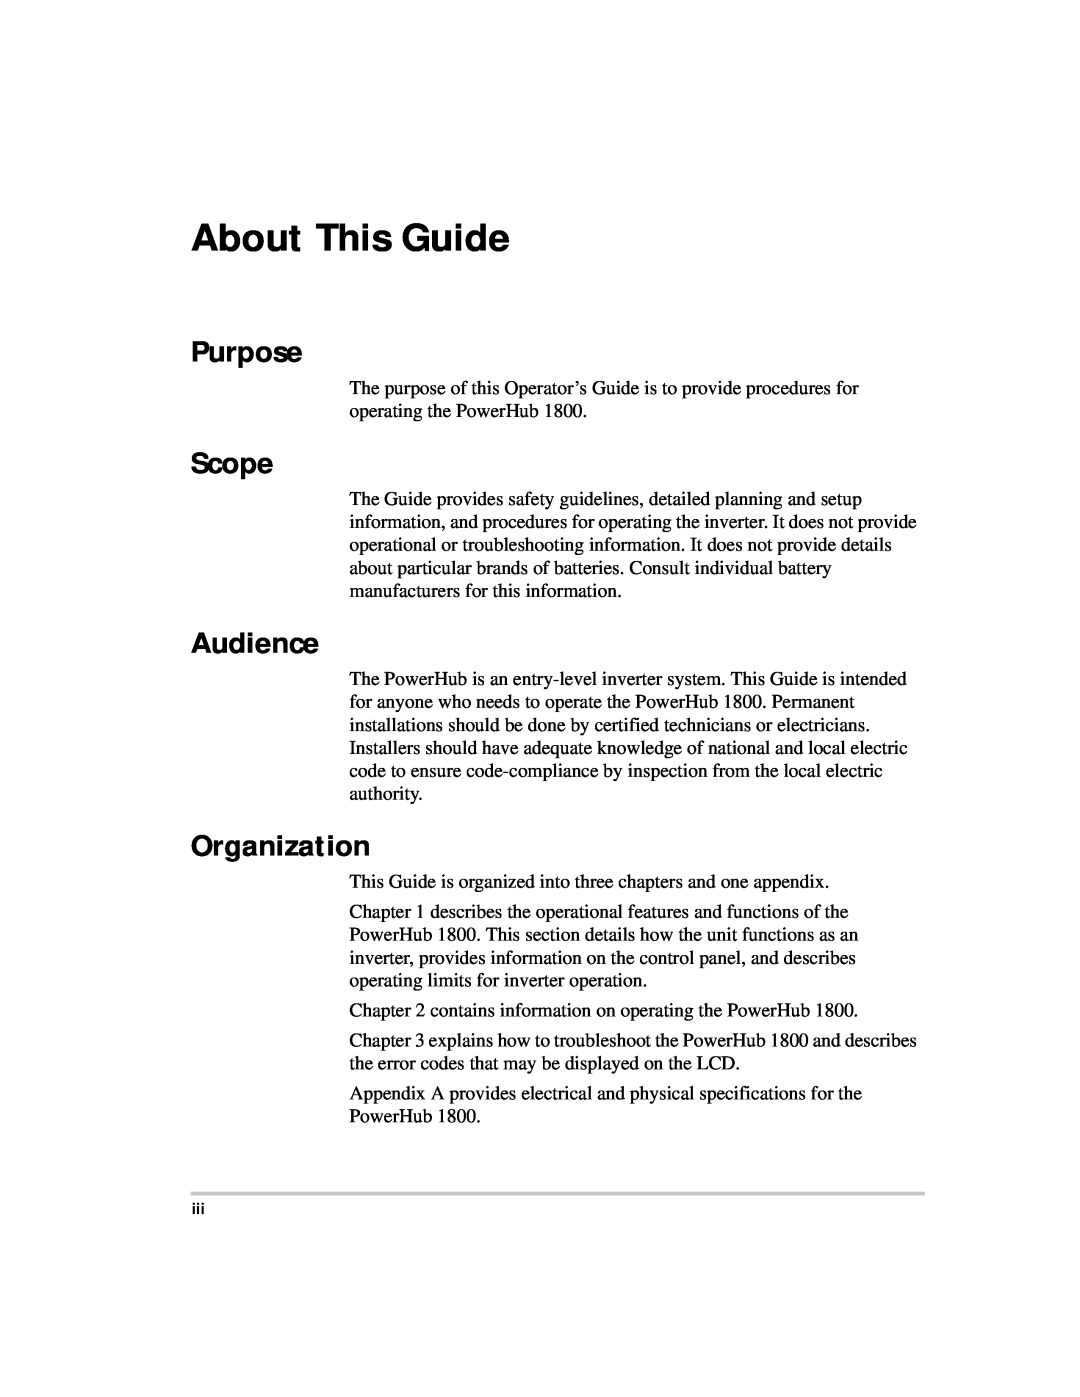 Xantrex Technology PH1800 manual About This Guide, Purpose, Scope, Audience, Organization 